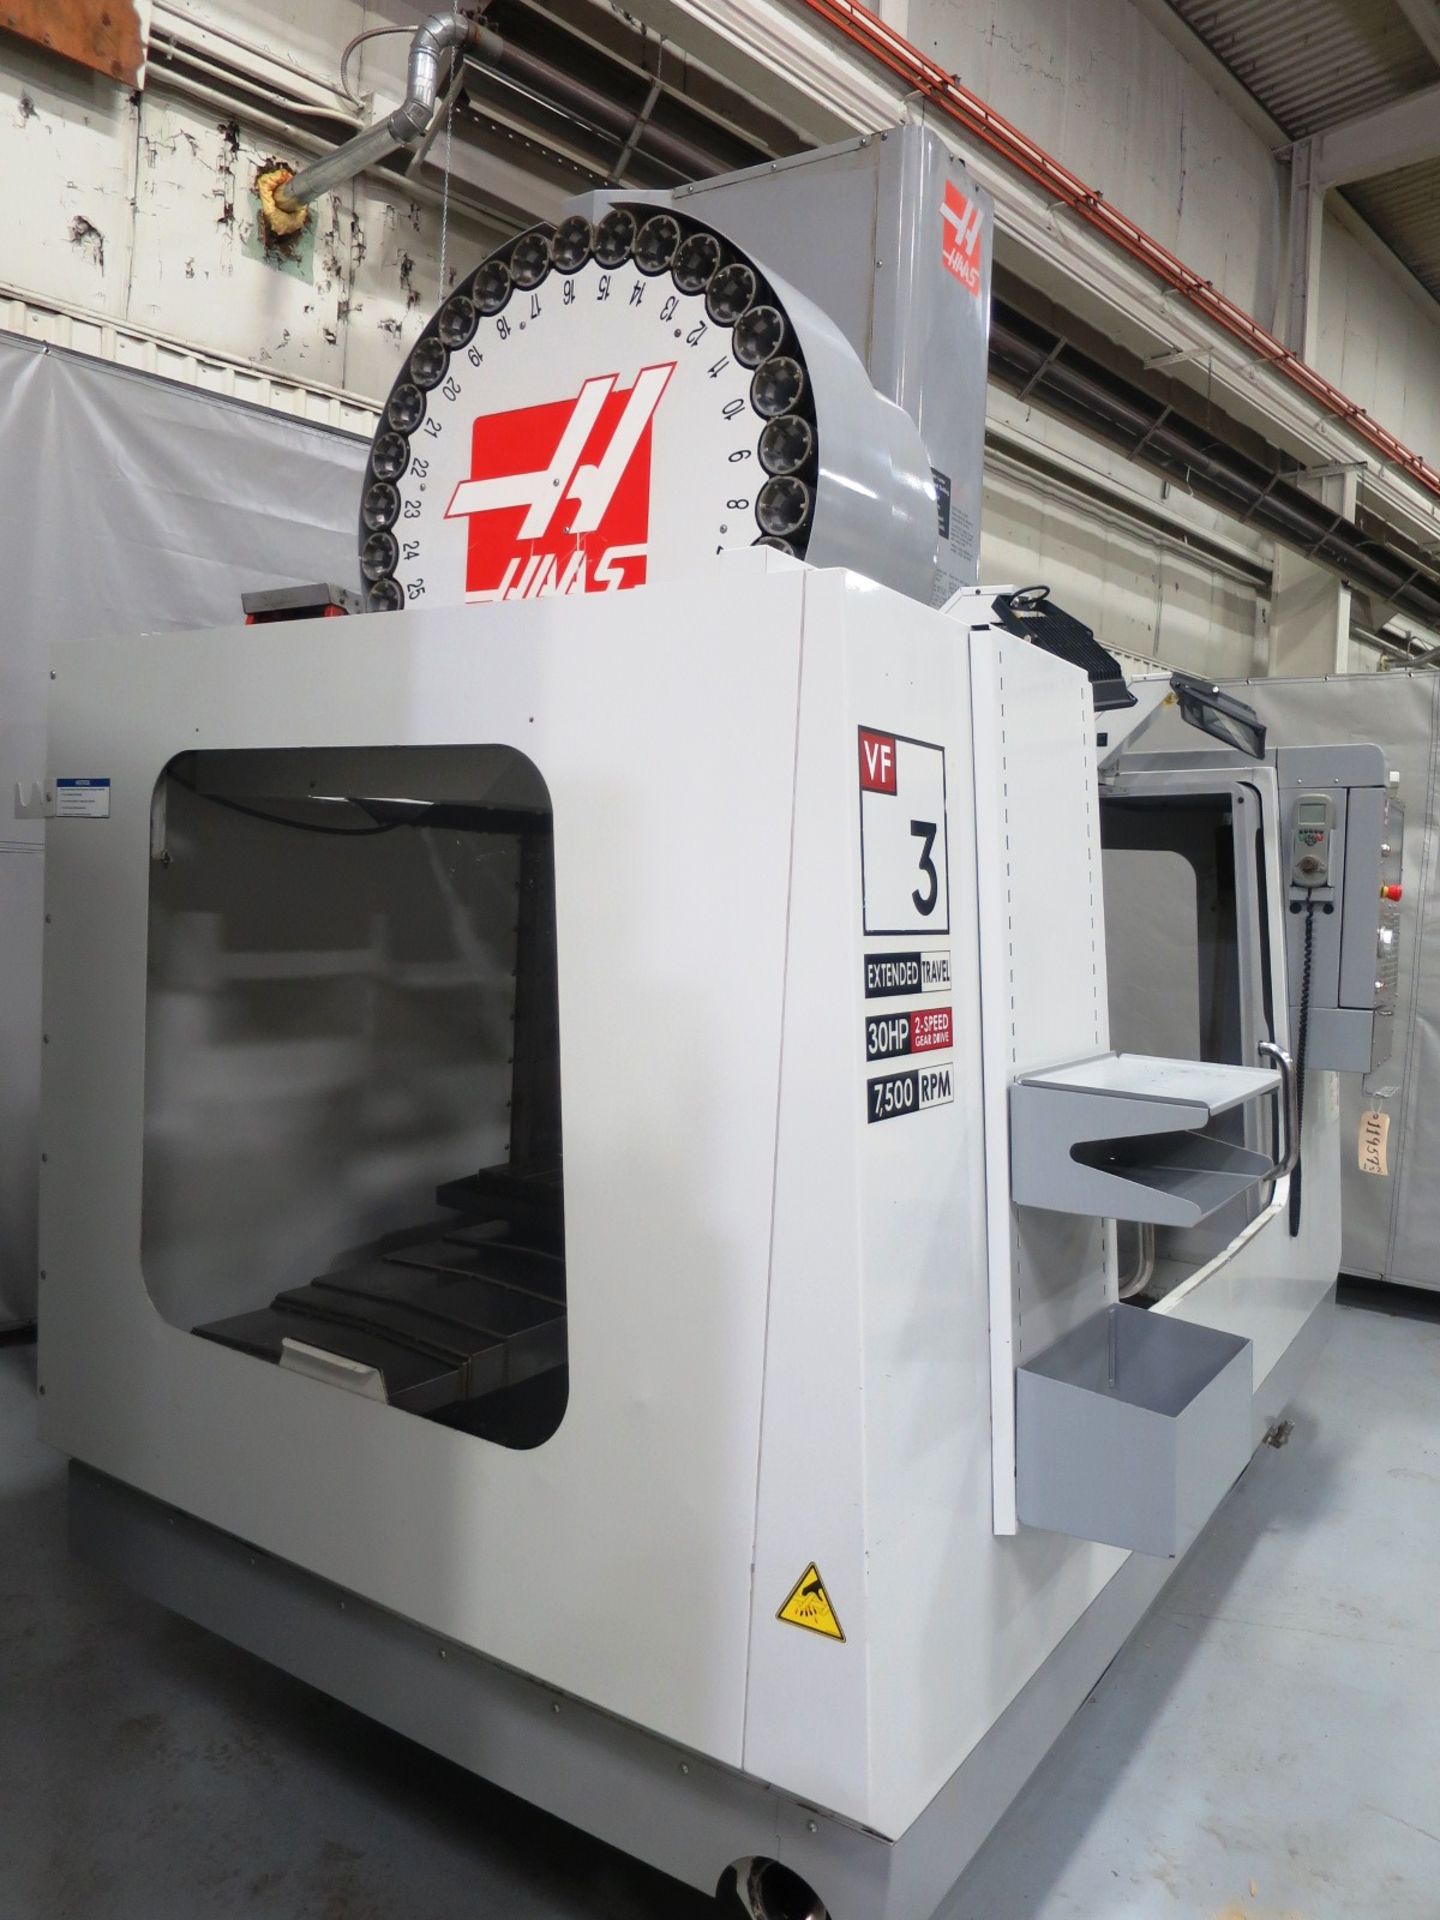 Haas Model VF-3YT/50 CNC Vertical Machining Center, S/N 1065260, New 2008 - Image 10 of 11